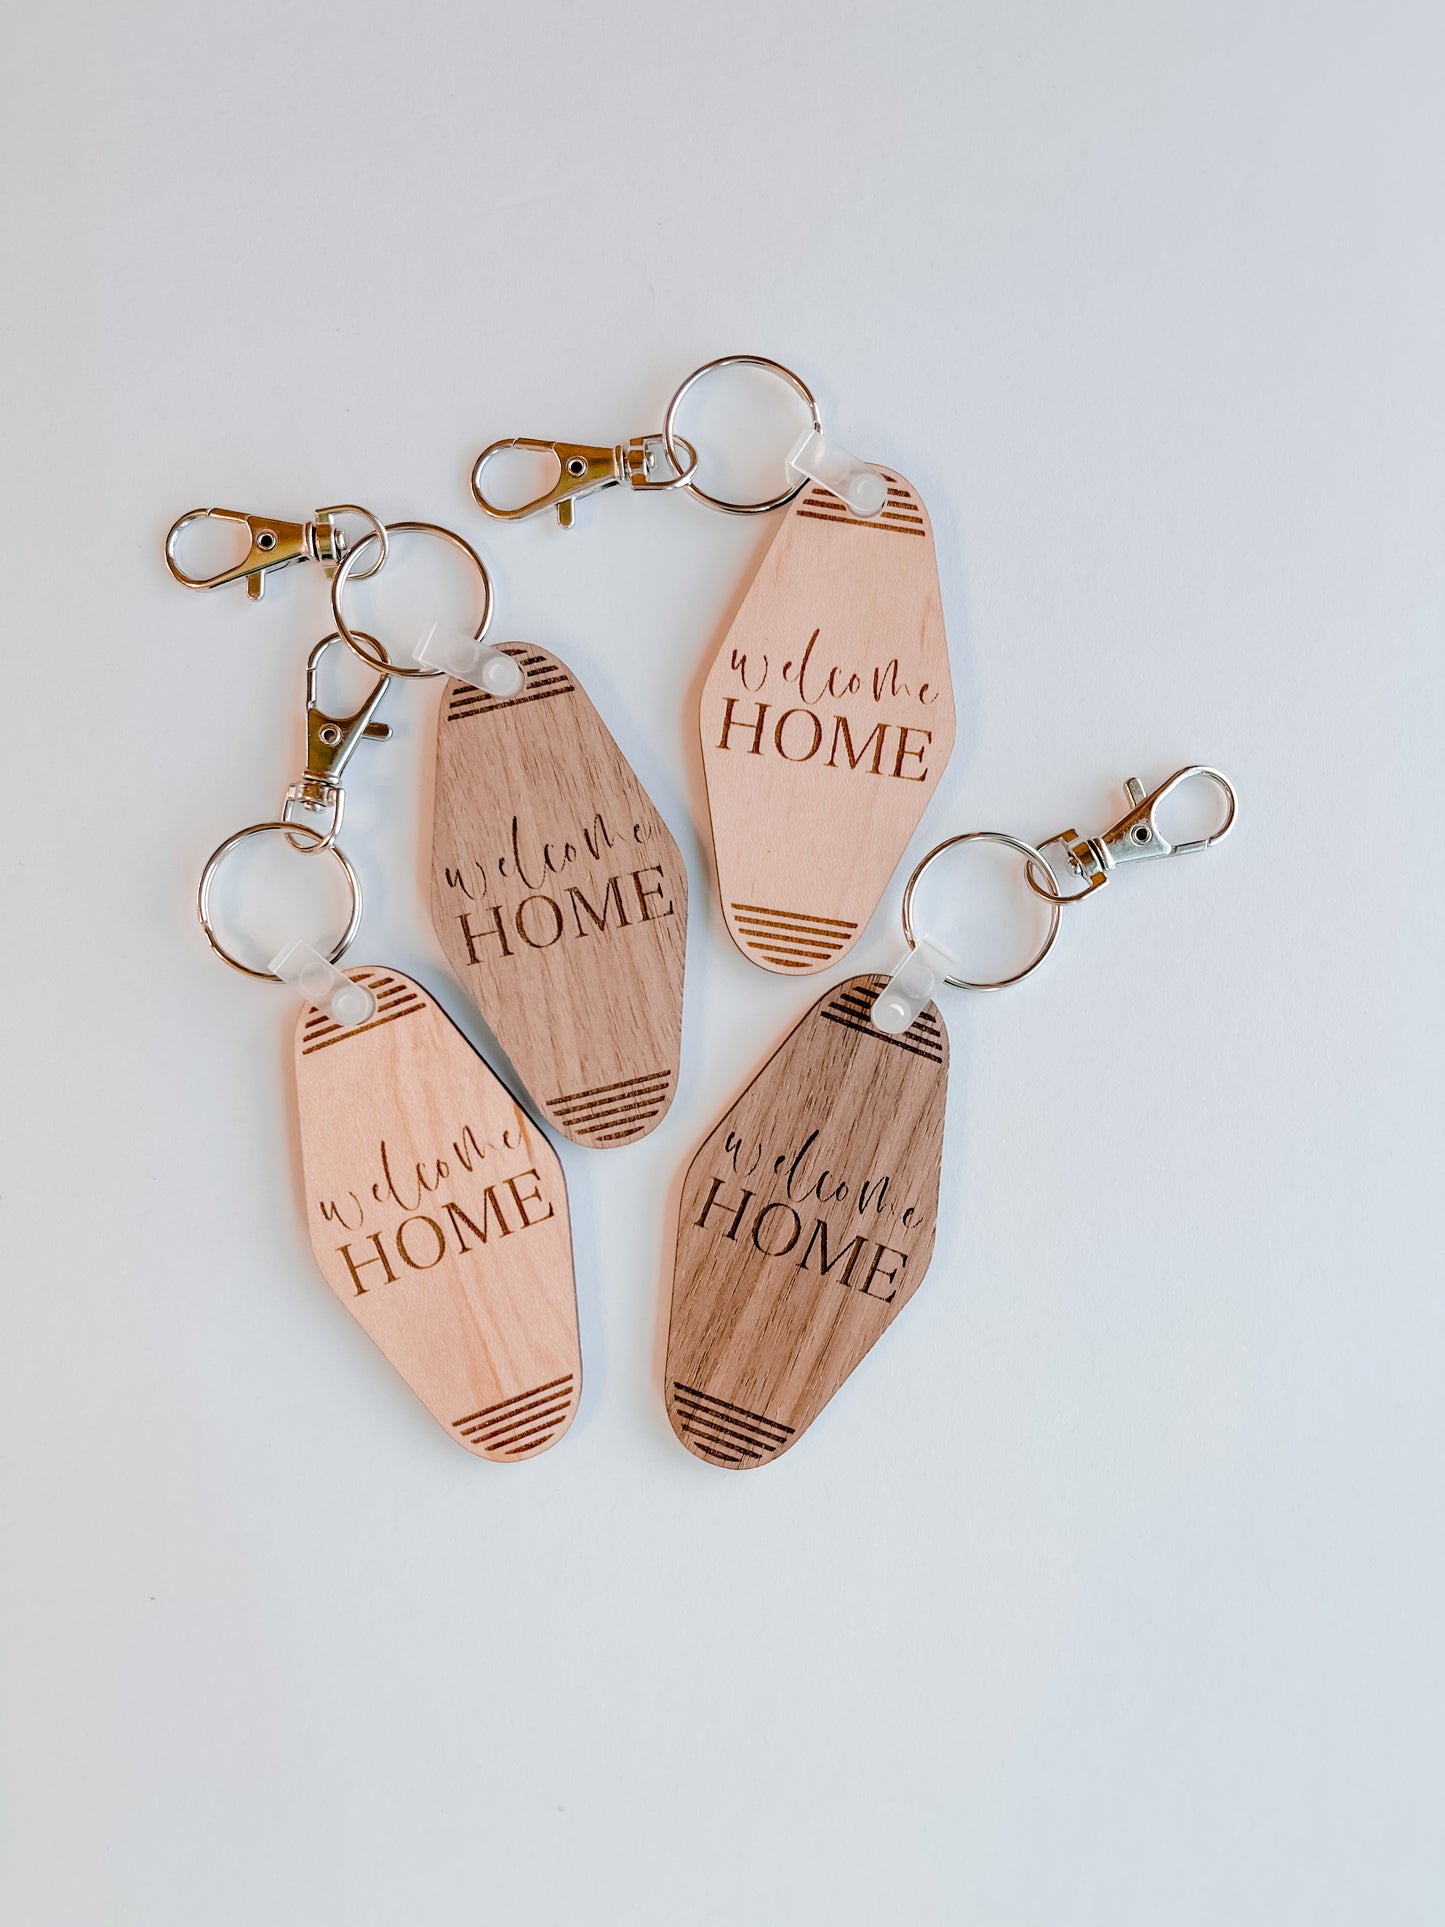 Welcome Home Motel Keychains